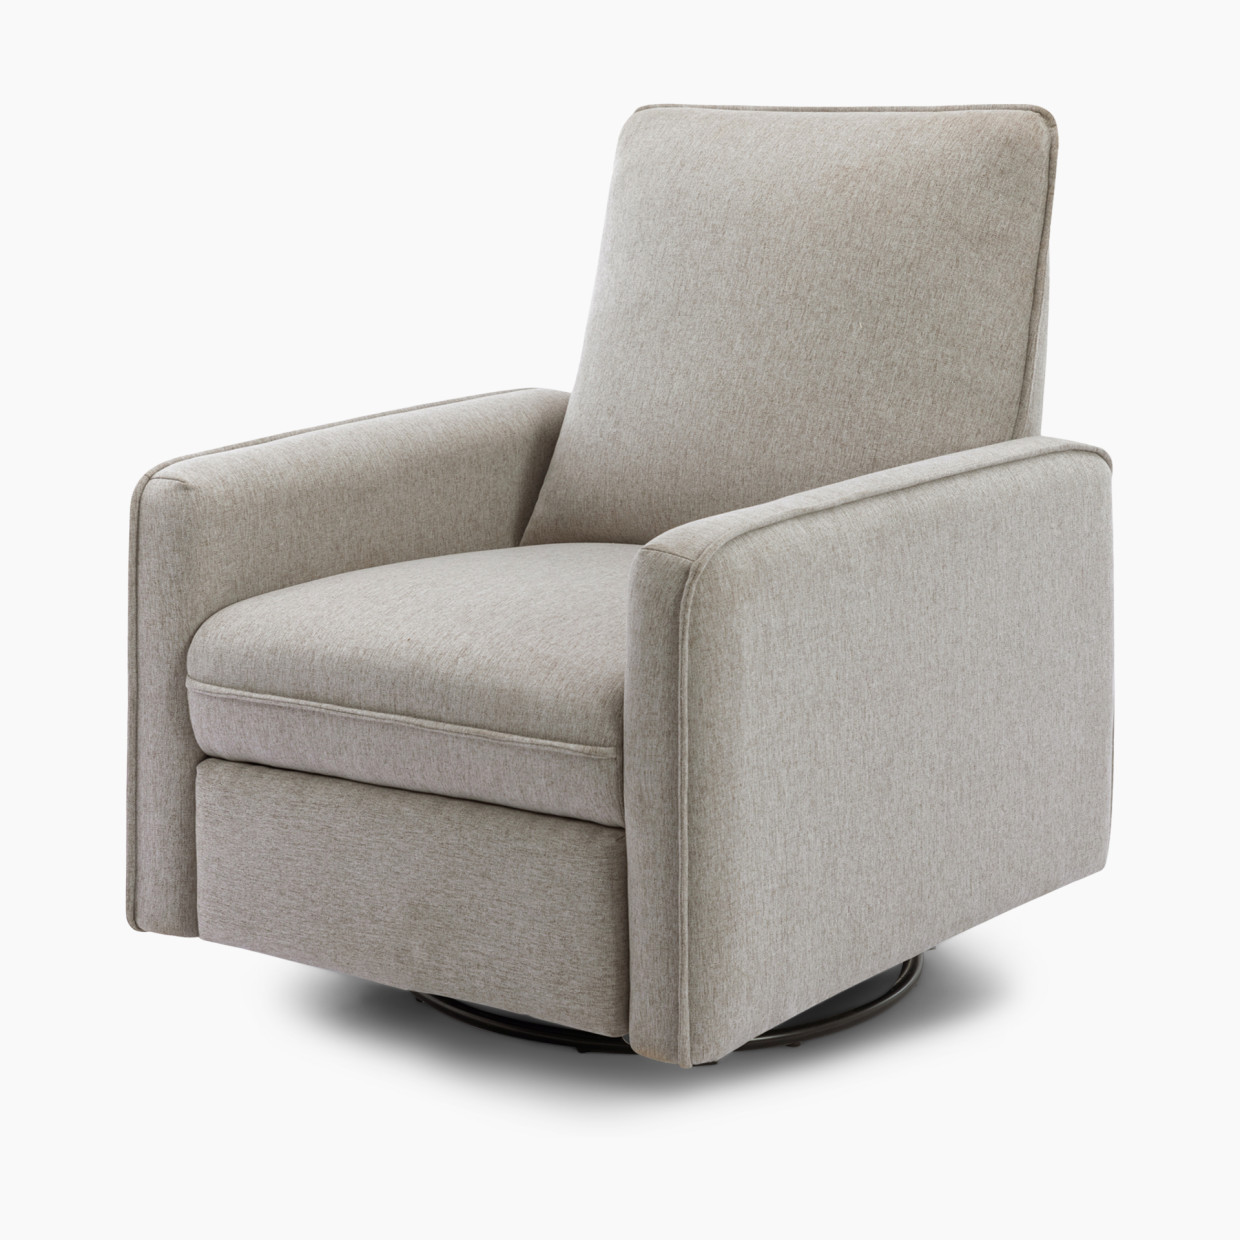 DaVinci Penny Recliner and Swivel Glider - Performance Grey Eco Weave.